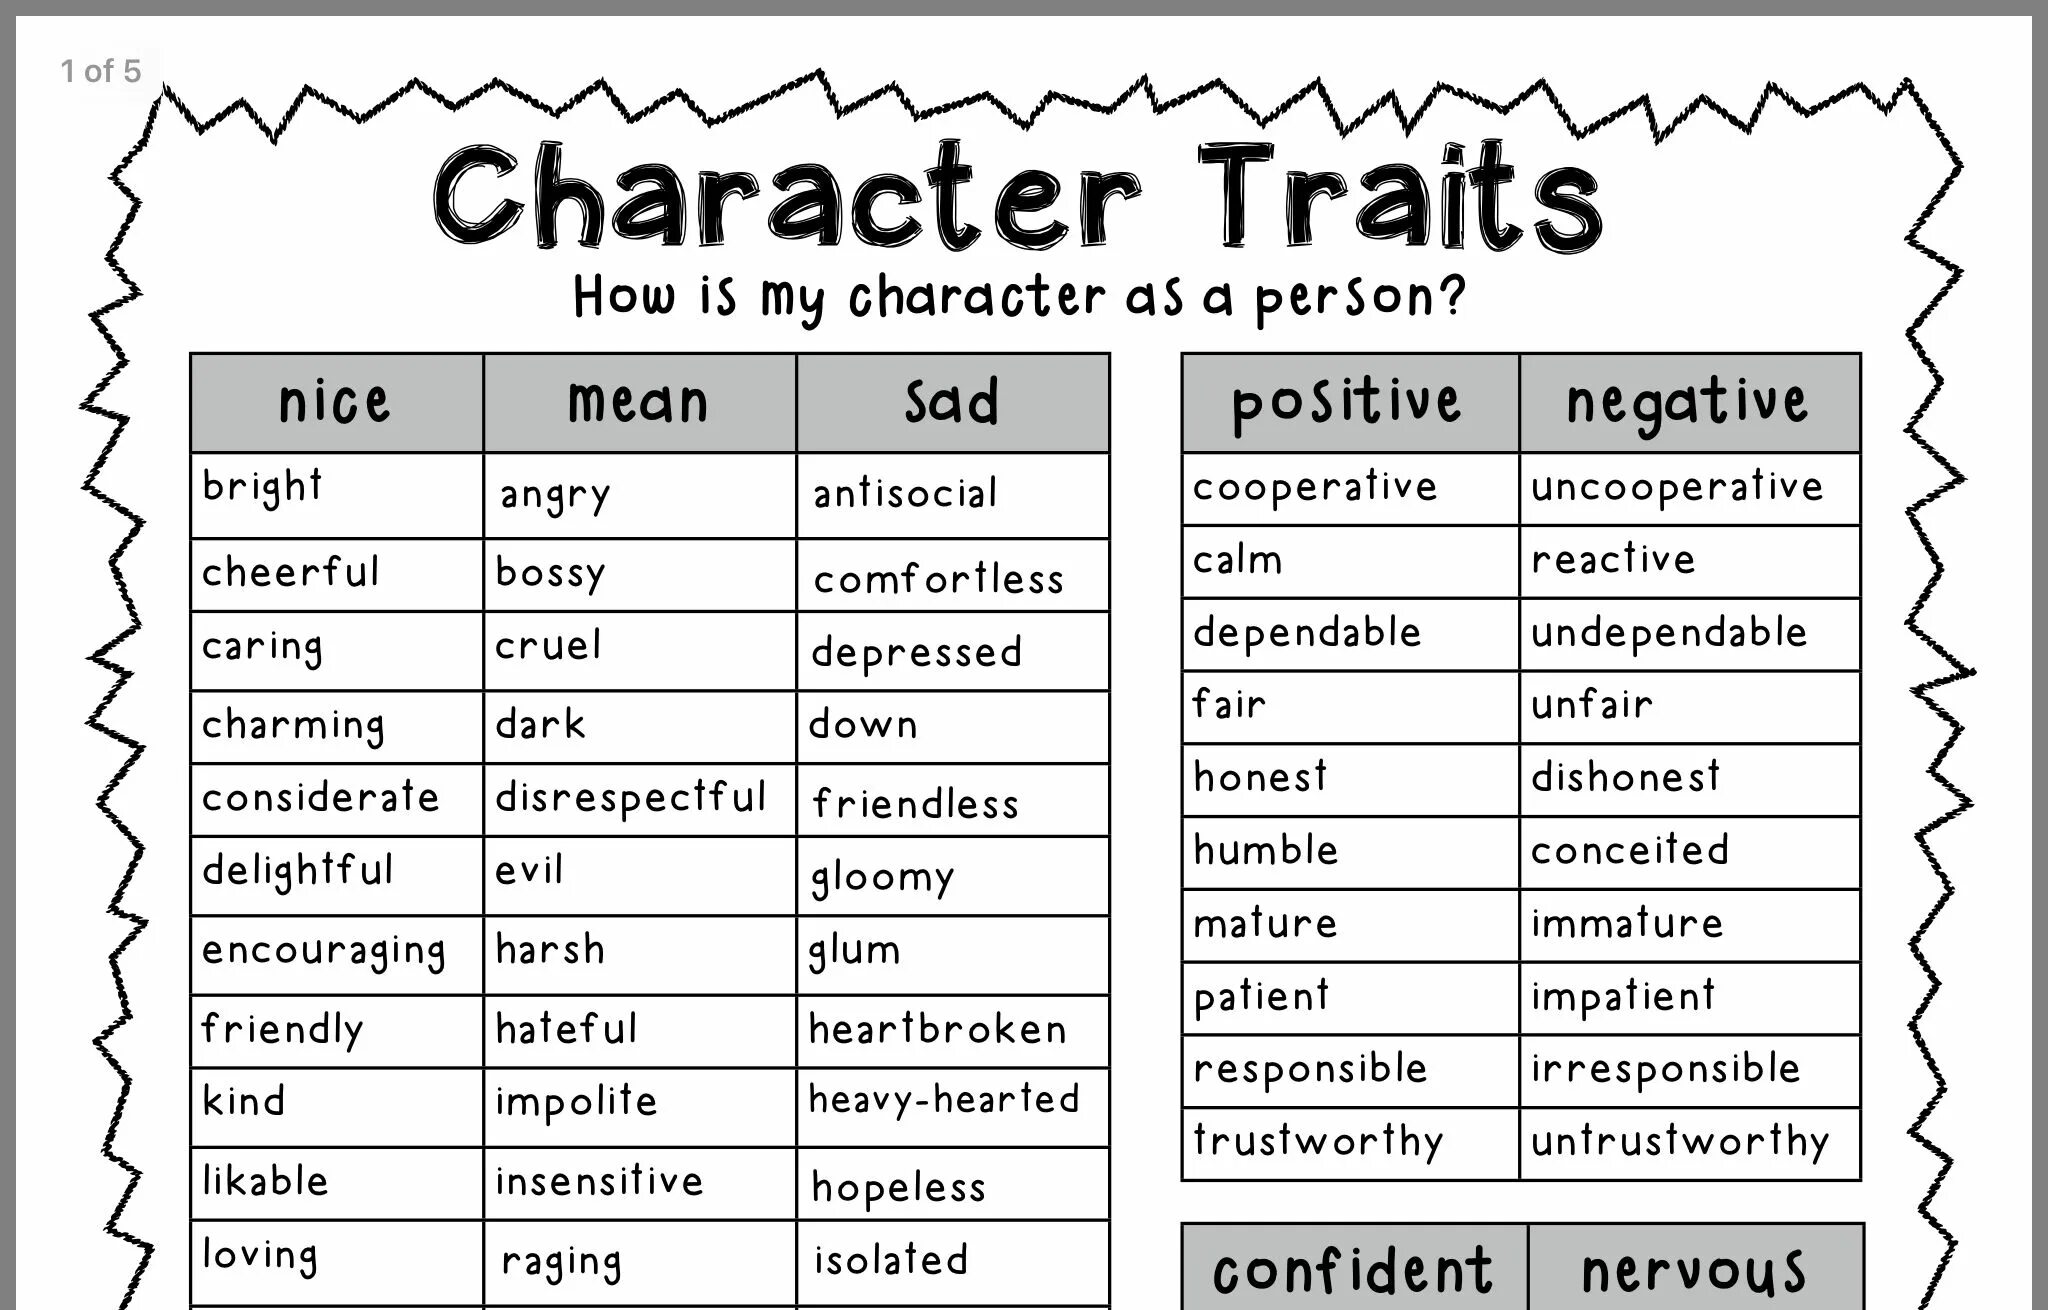 Character traits list. Positive and negative traits of character. Character qualities. Personal traits of character. People's characteristics